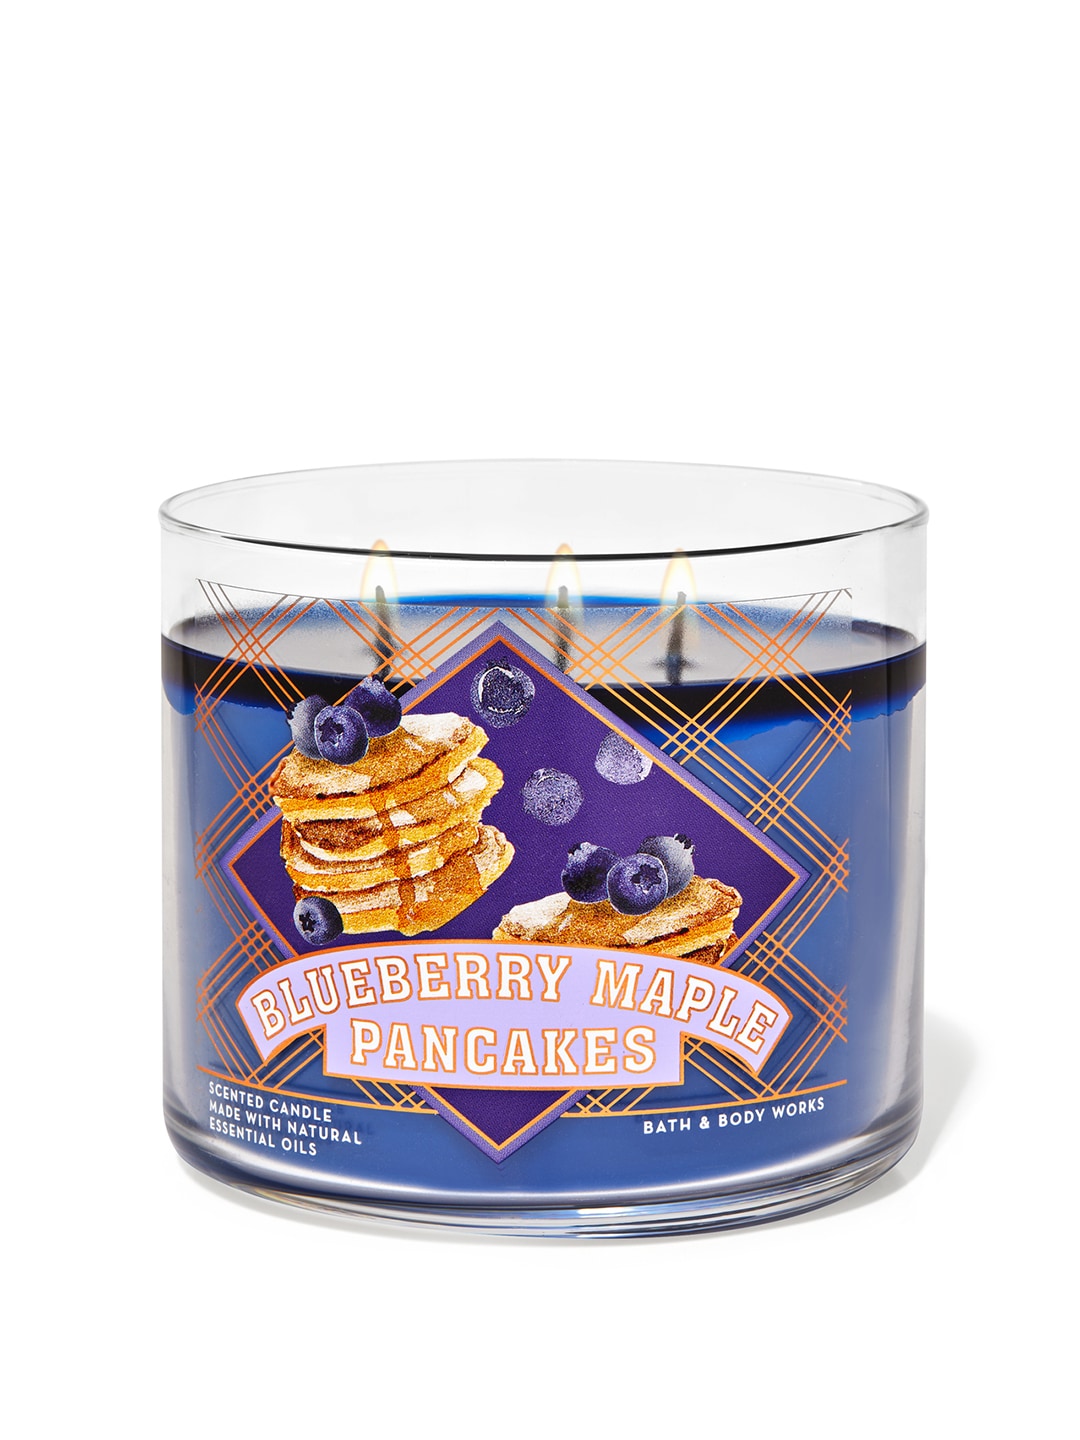 Bath & Body Works Blueberry Maple Pancakes 3-Wick Scented Candle - 411g Price in India